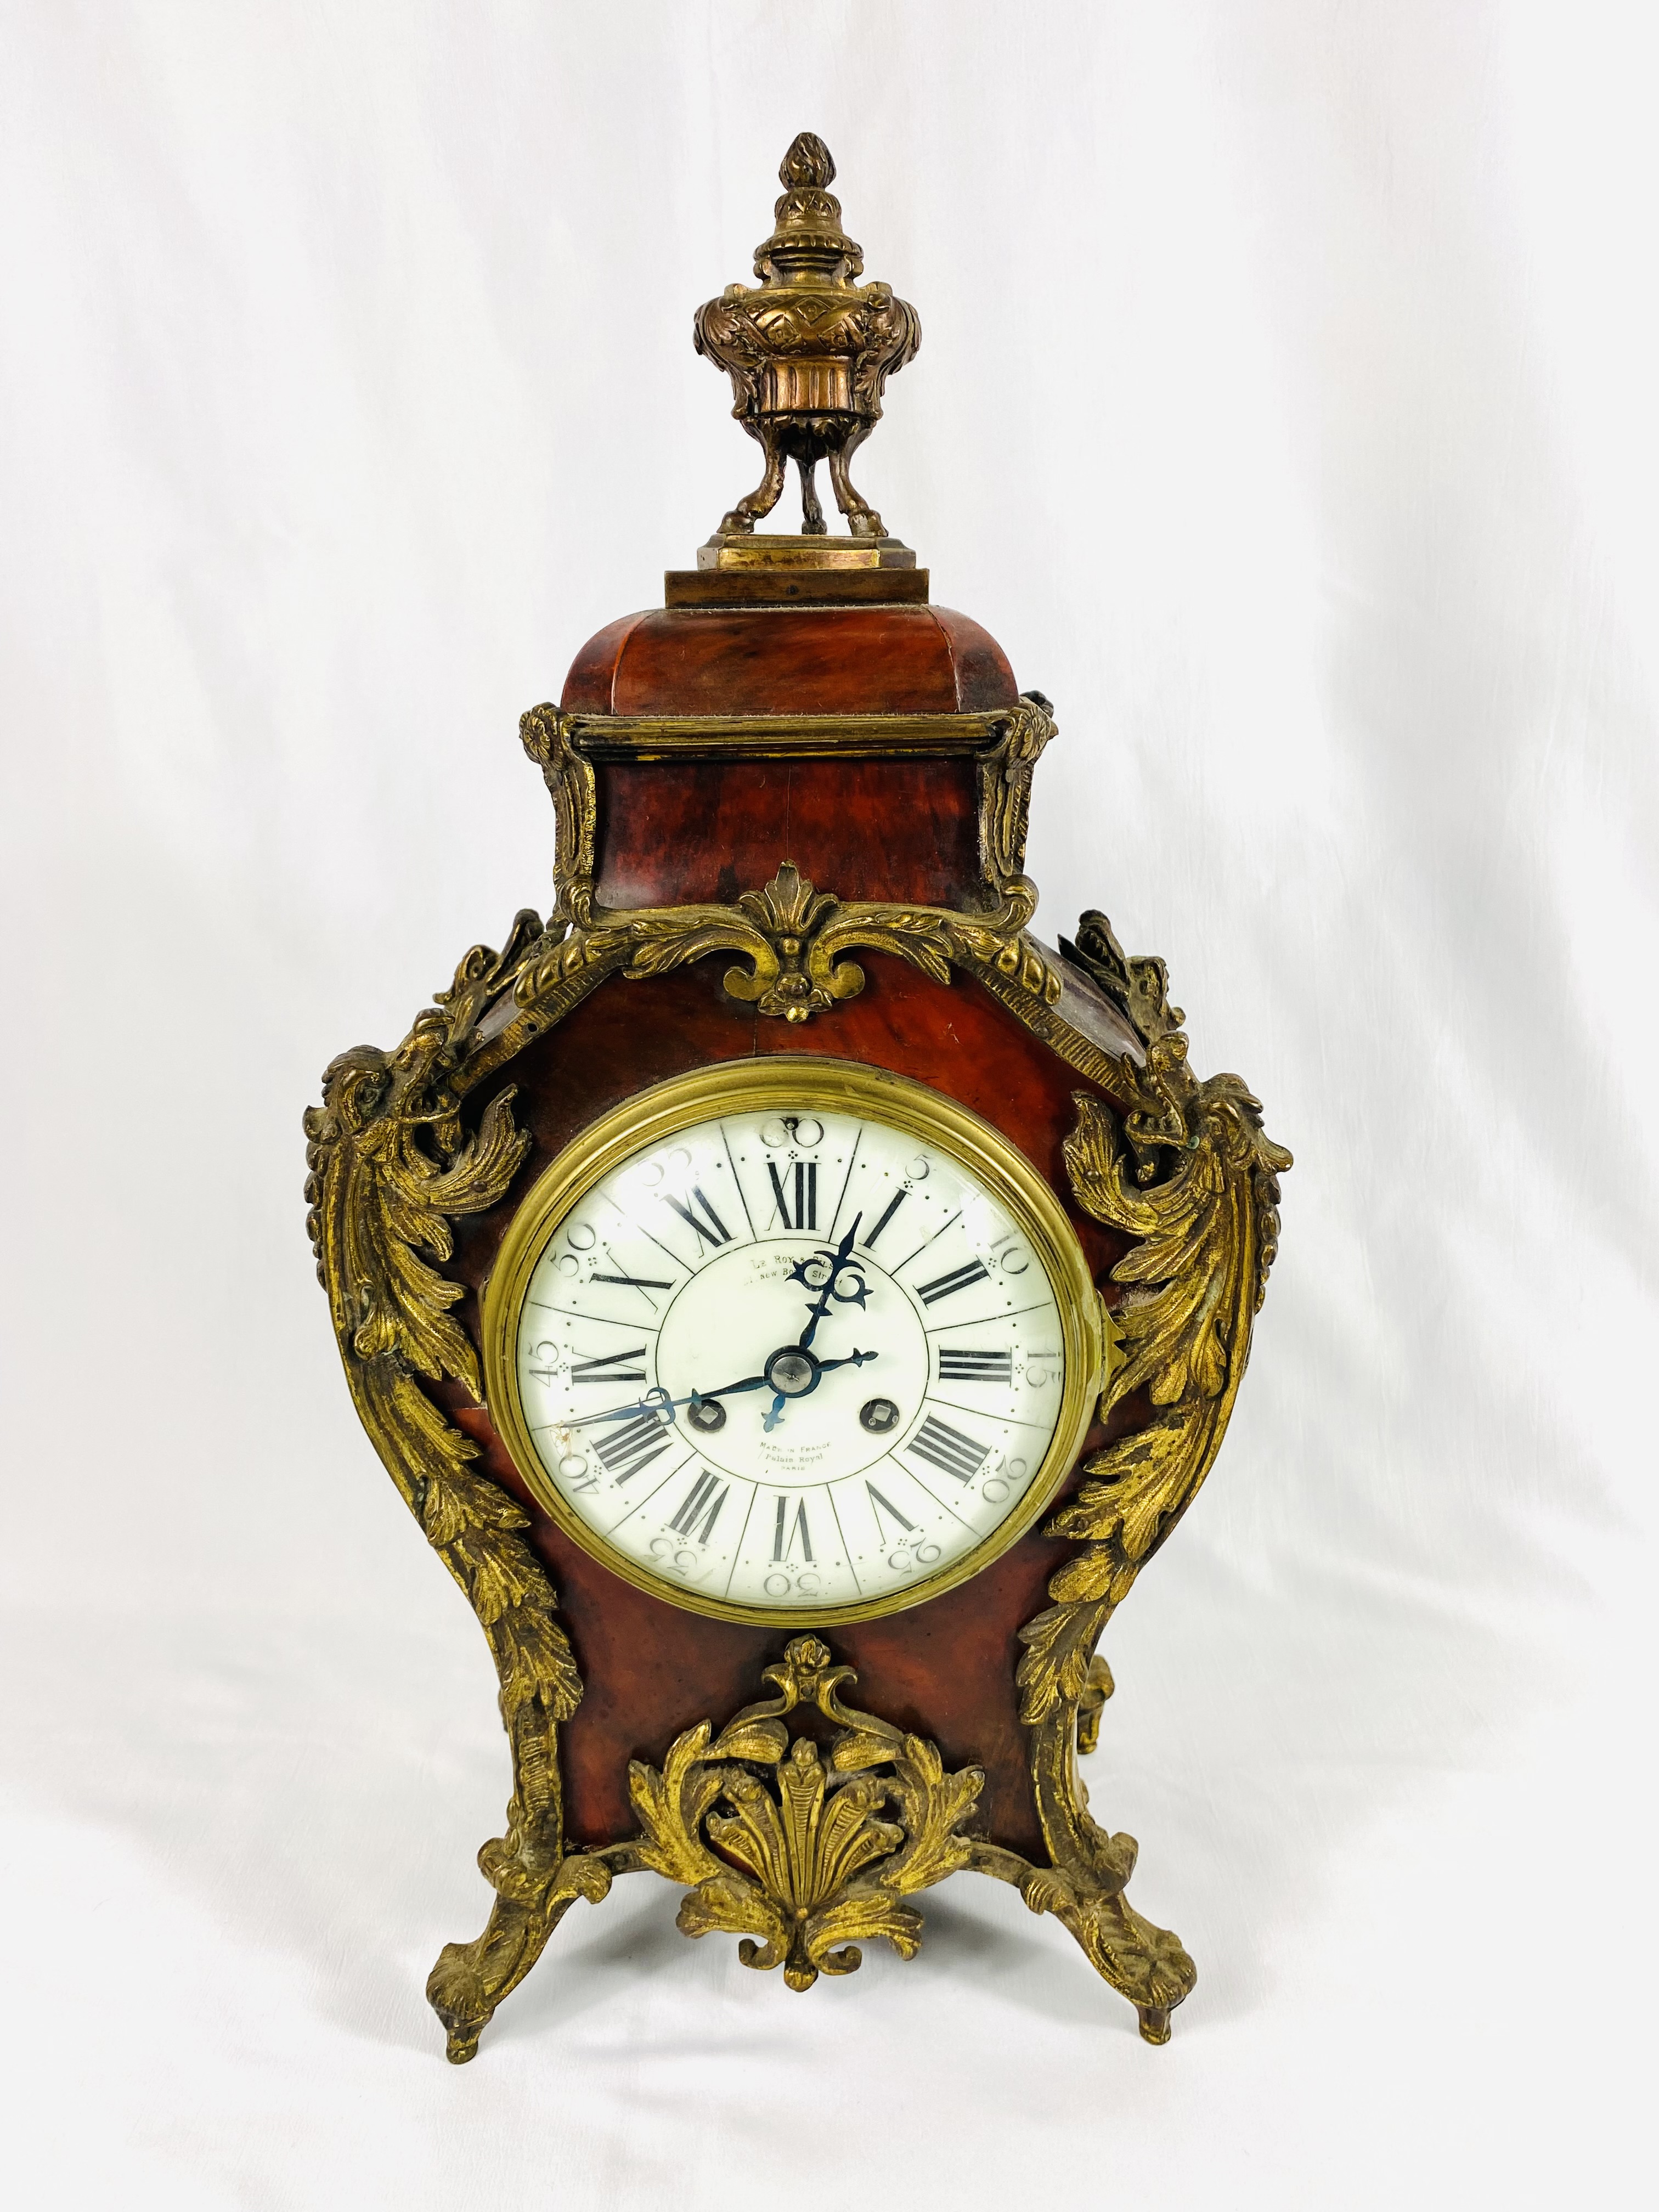 French Palais Royal wood and ormolu mantel clock. From the Estate of Dame Mary Quant - Image 12 of 12